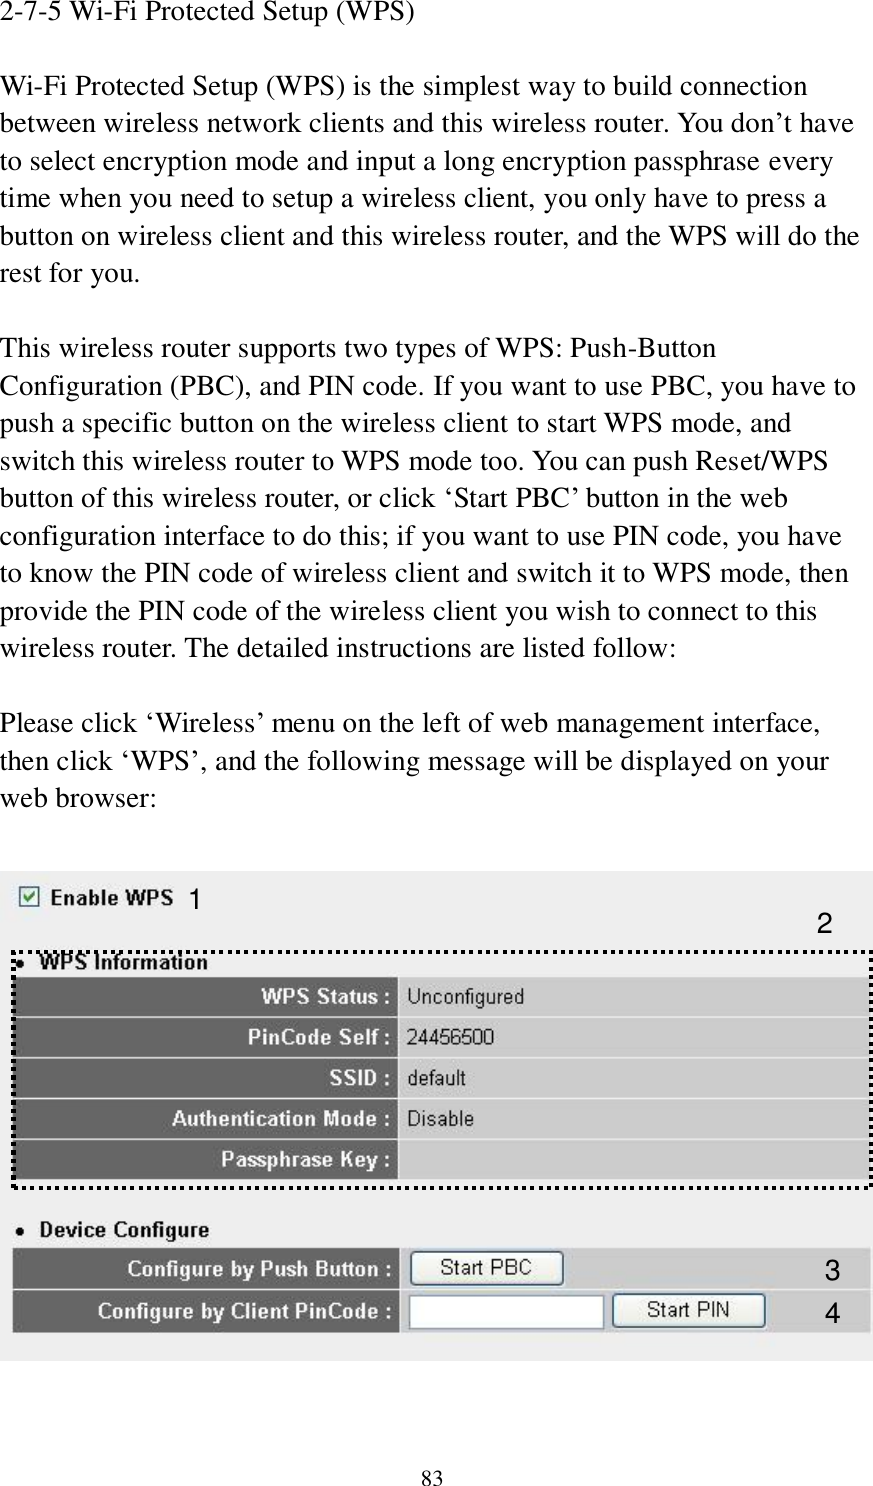 83 2-7-5 Wi-Fi Protected Setup (WPS)  Wi-Fi Protected Setup (WPS) is the simplest way to build connection between wireless network clients and this wireless router. You don‟t have to select encryption mode and input a long encryption passphrase every time when you need to setup a wireless client, you only have to press a button on wireless client and this wireless router, and the WPS will do the rest for you.  This wireless router supports two types of WPS: Push-Button Configuration (PBC), and PIN code. If you want to use PBC, you have to push a specific button on the wireless client to start WPS mode, and switch this wireless router to WPS mode too. You can push Reset/WPS button of this wireless router, or click „Start PBC‟ button in the web configuration interface to do this; if you want to use PIN code, you have to know the PIN code of wireless client and switch it to WPS mode, then provide the PIN code of the wireless client you wish to connect to this wireless router. The detailed instructions are listed follow:  Please click „Wireless‟ menu on the left of web management interface, then click „WPS‟, and the following message will be displayed on your web browser:    1 3 4 2 